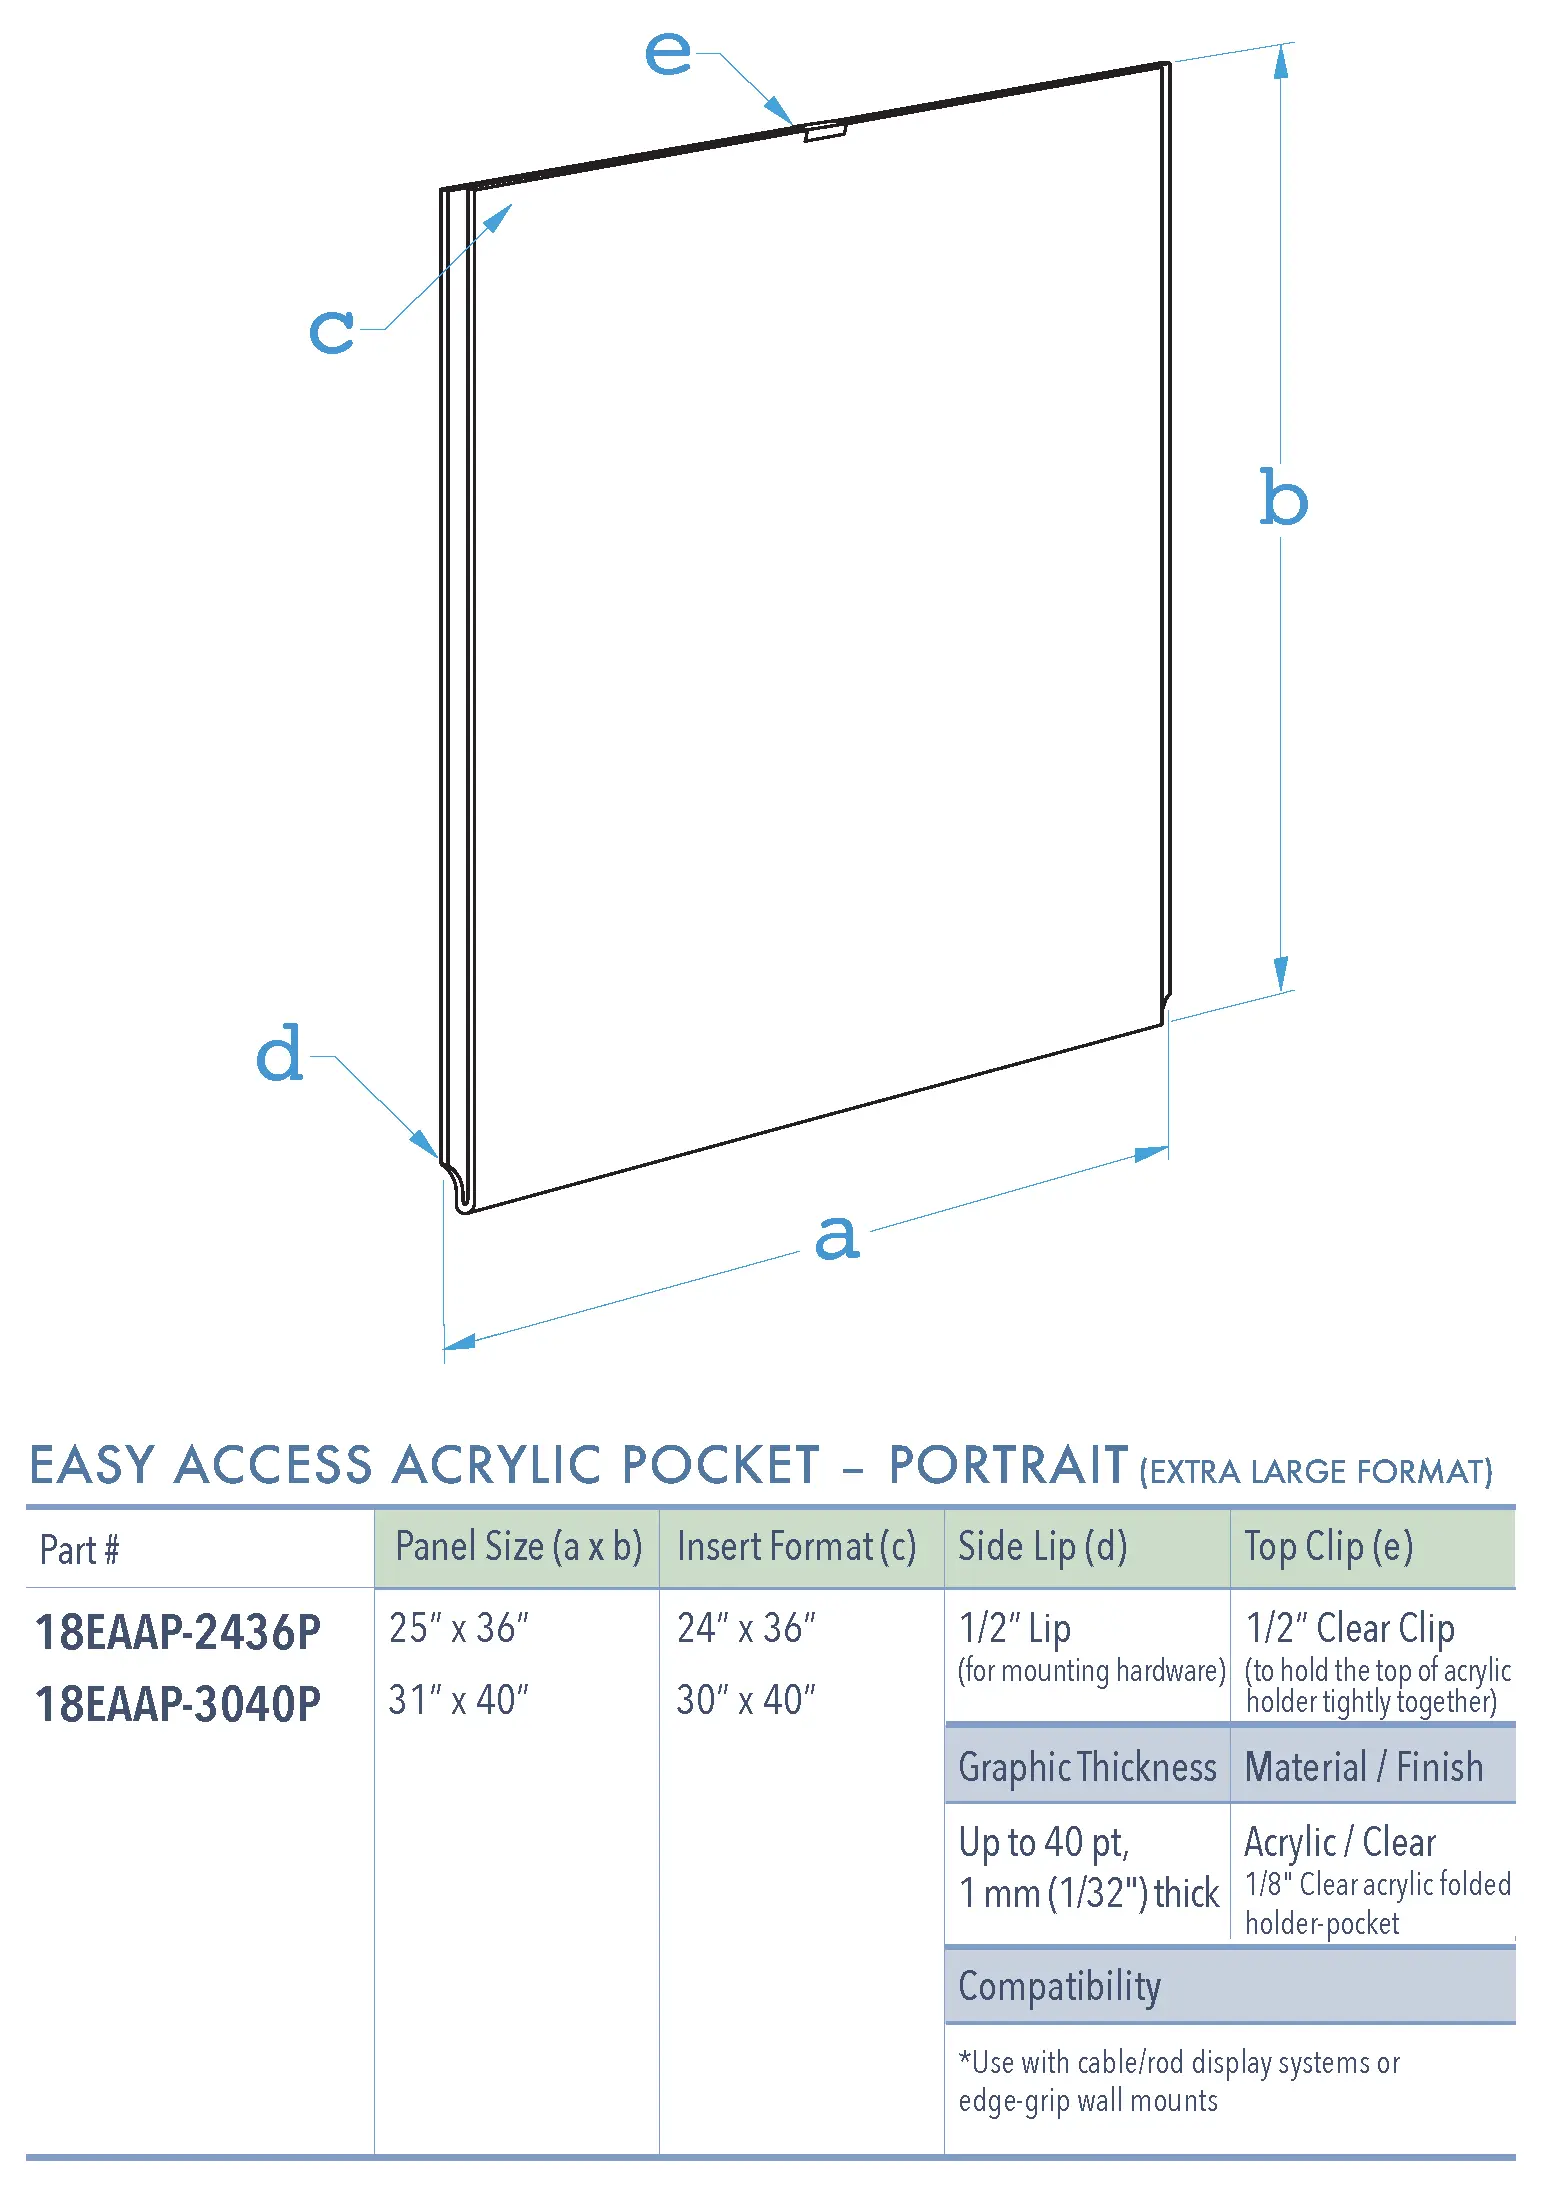 Specifications for 18EAAP-INSERT-PORTRAIT-XL